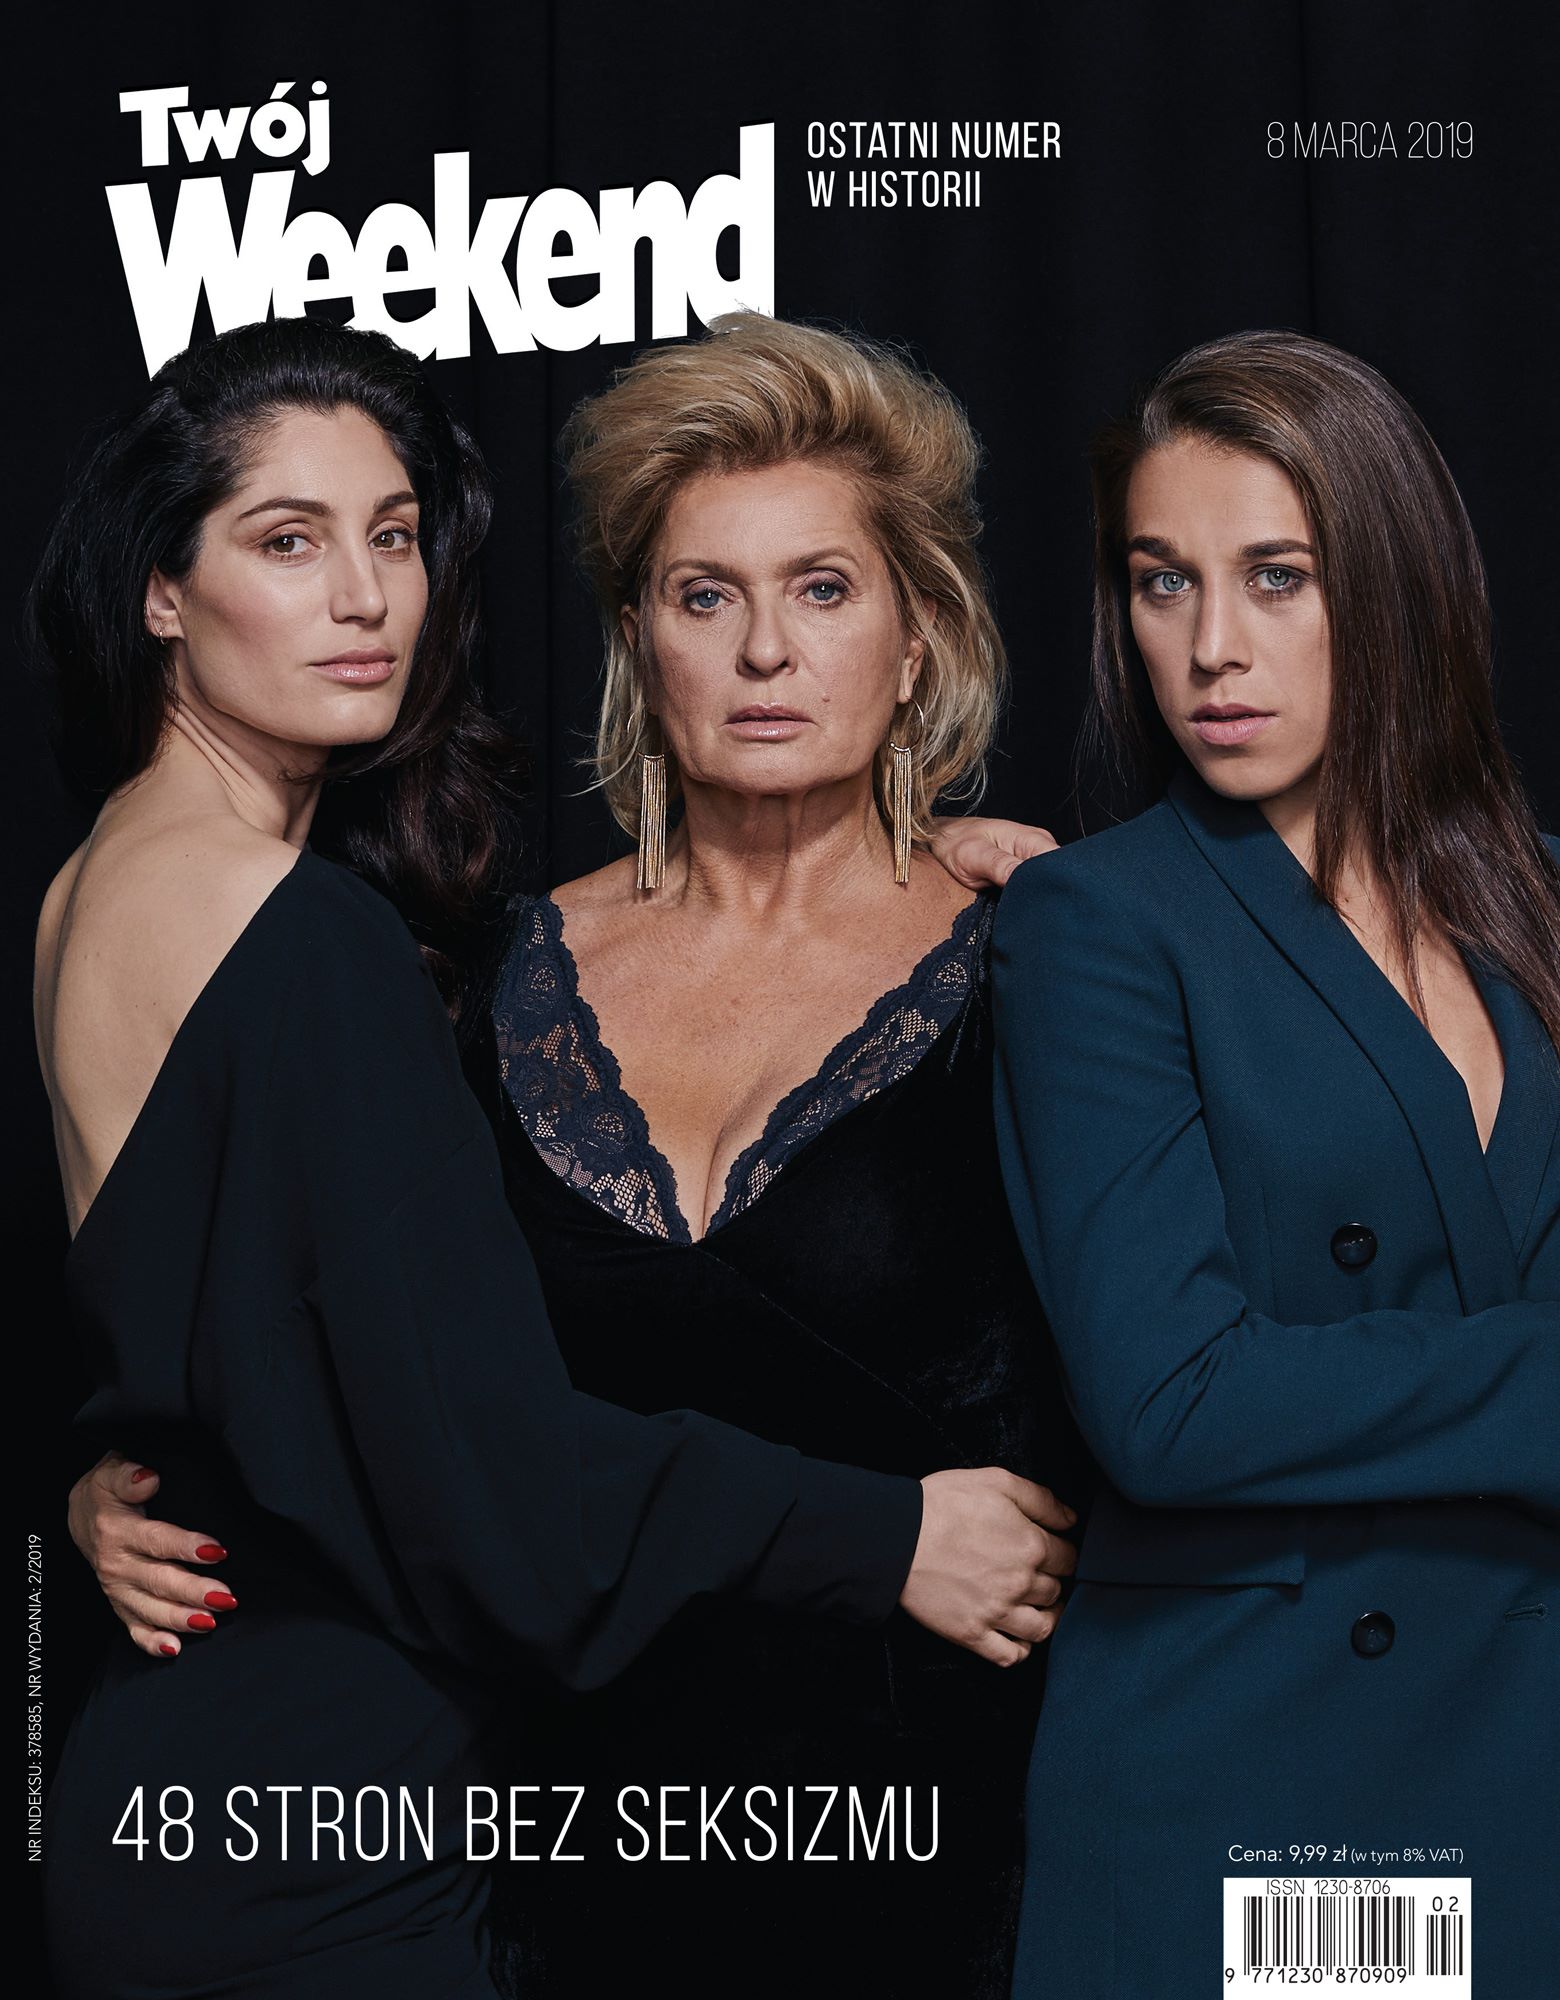 THE WEEKEND COVER STYLED BY KAS KRYST